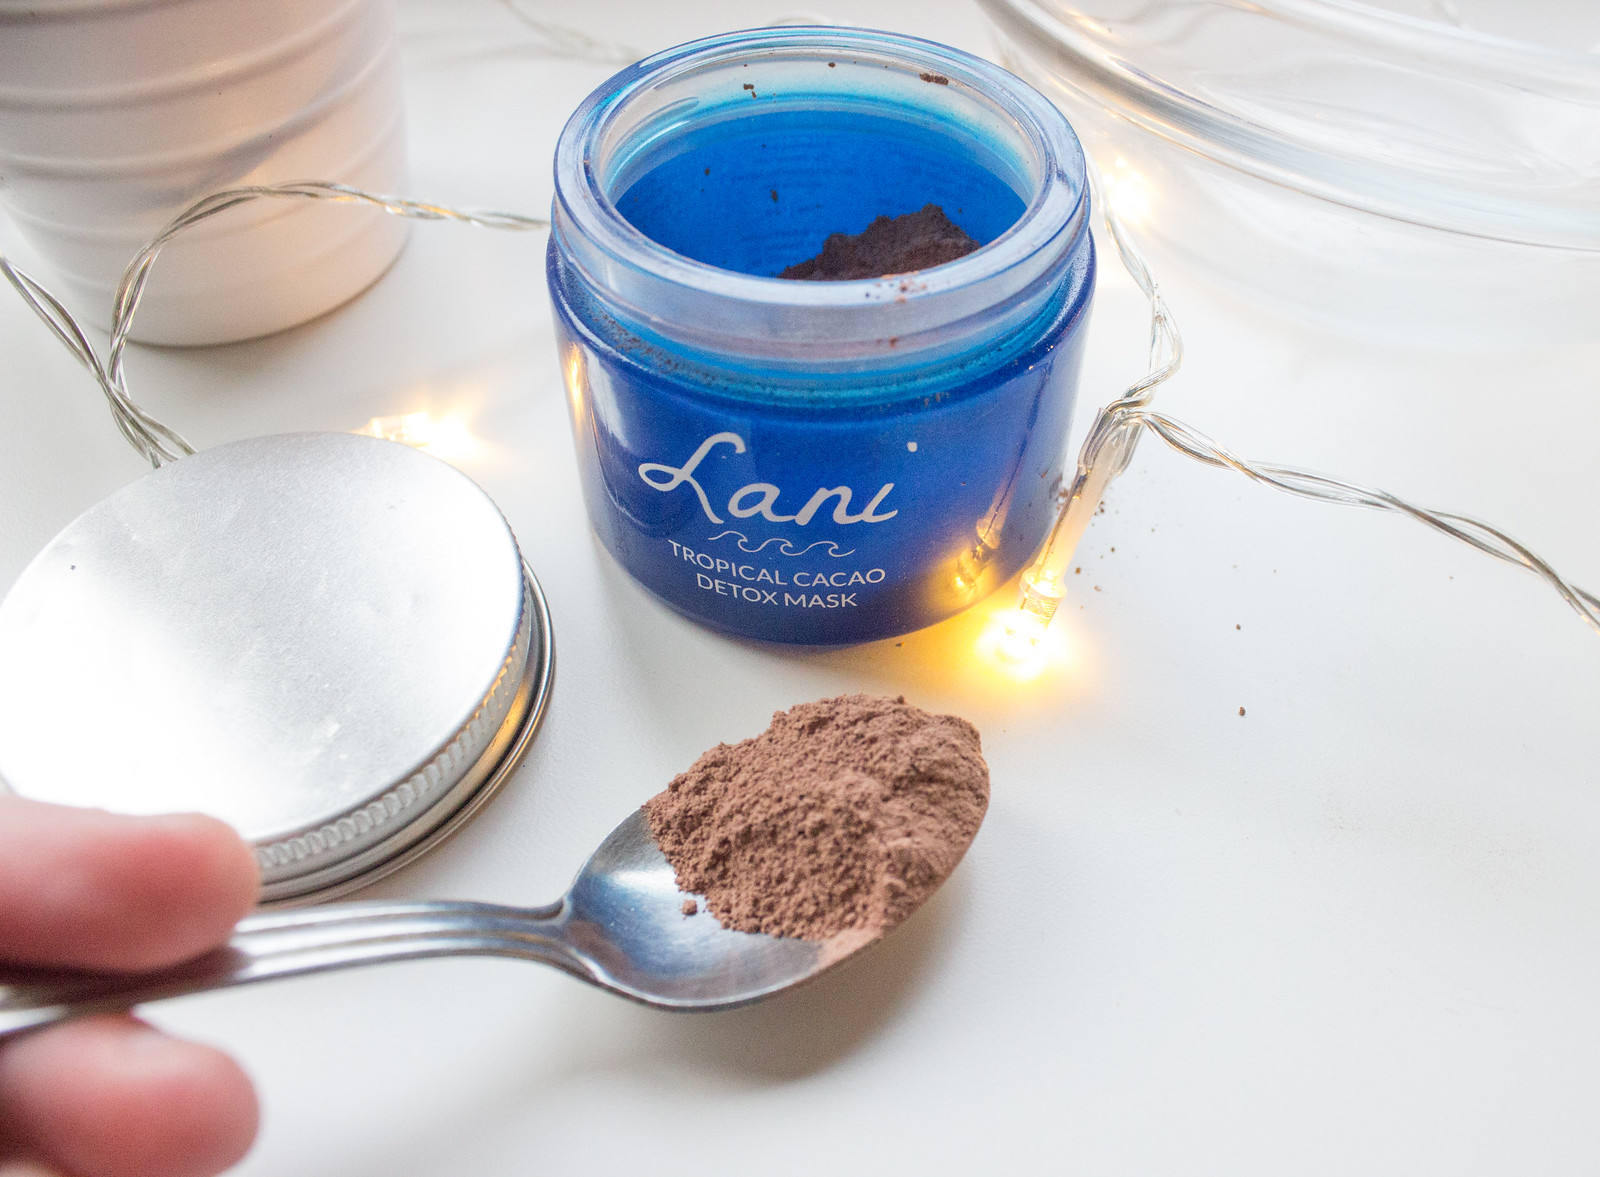 Lani Tropical Detox Cacao Face Mask comes in powder form in a jar and turns into a mousse